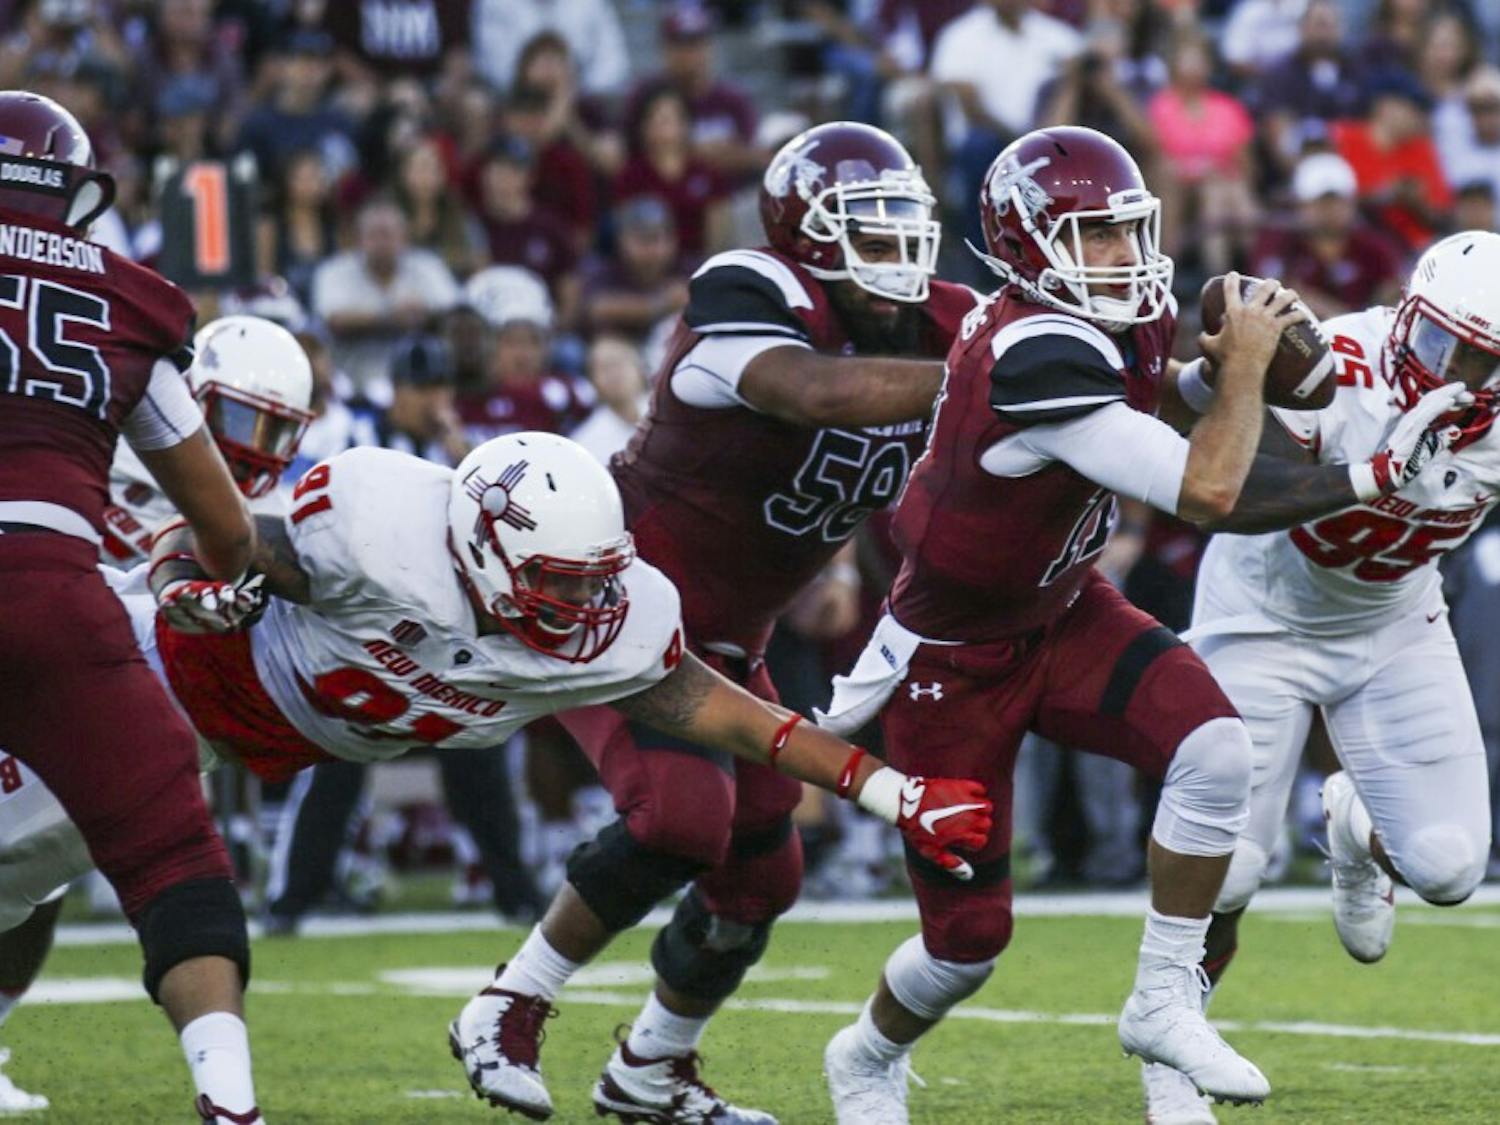 NMSU senior quarterback Tyler Rogers looks for an open player as Lobos chase him down Saturday, Sept. 10, 2016 in Las Cruces, New Mexico. The Aggies had a slow start in the Rio Grande Rivalry, but finished on top 32-31.